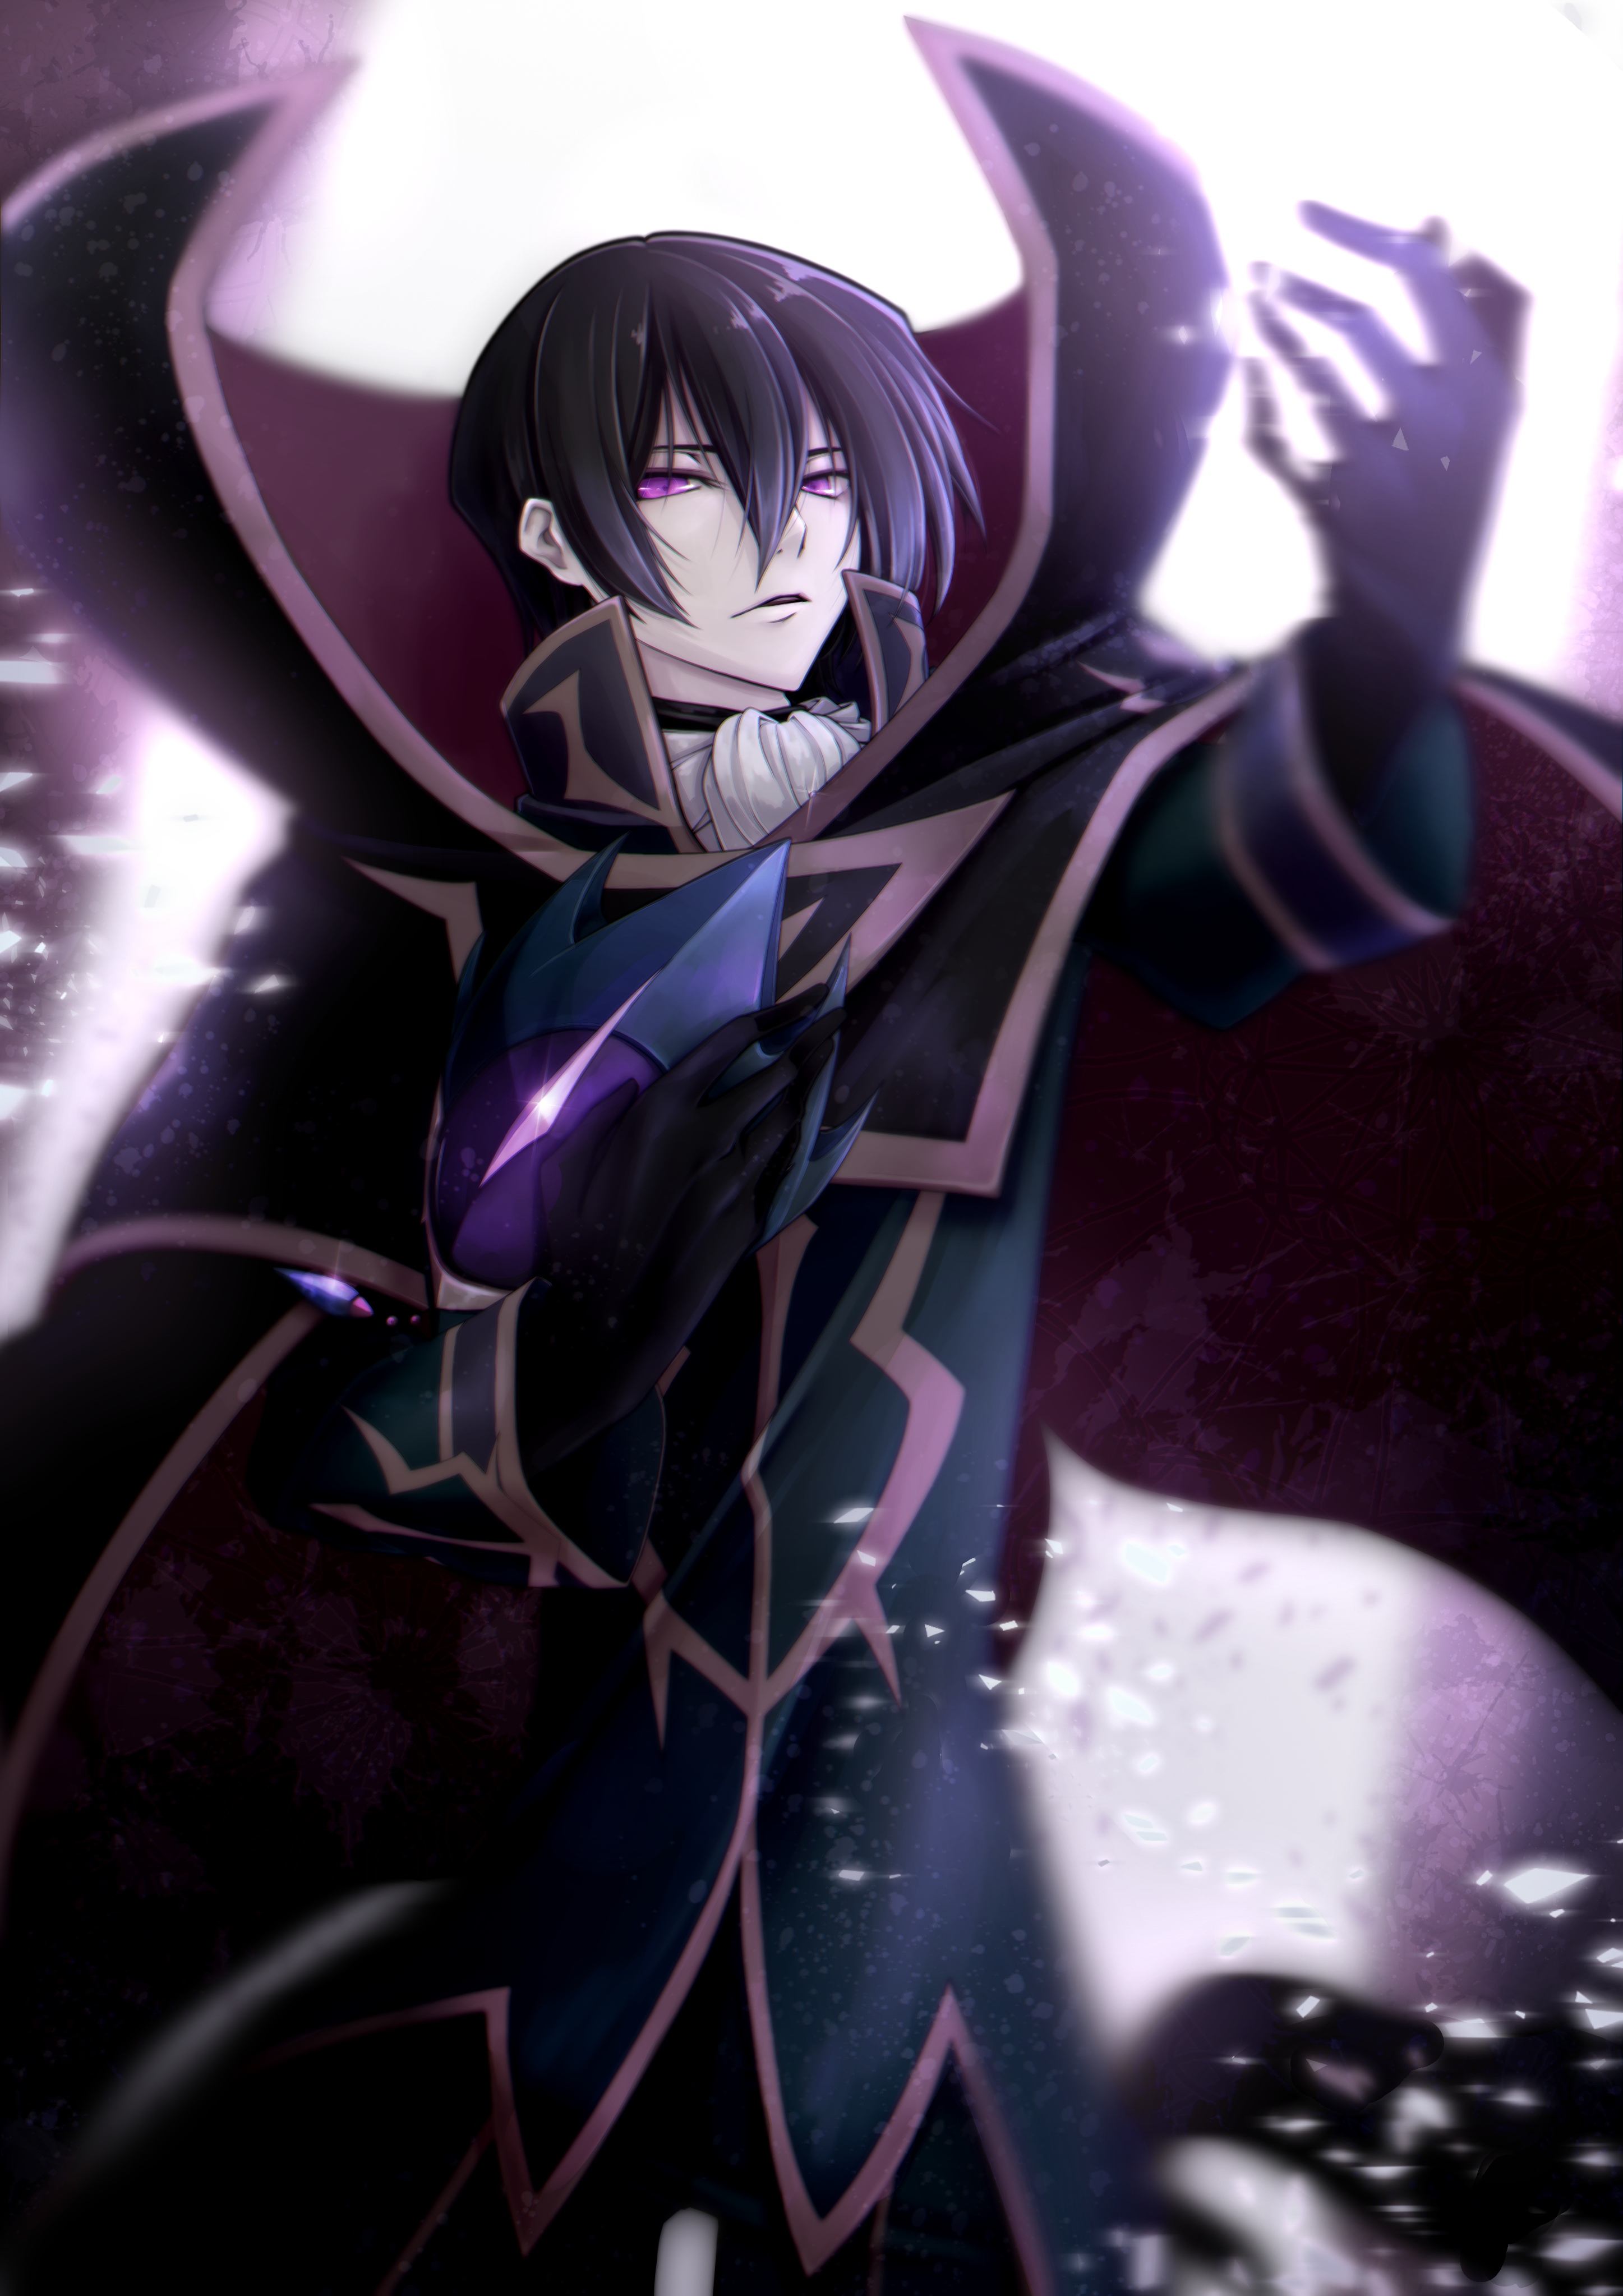 Lelouch - Other & Anime Background Wallpapers on Desktop Nexus